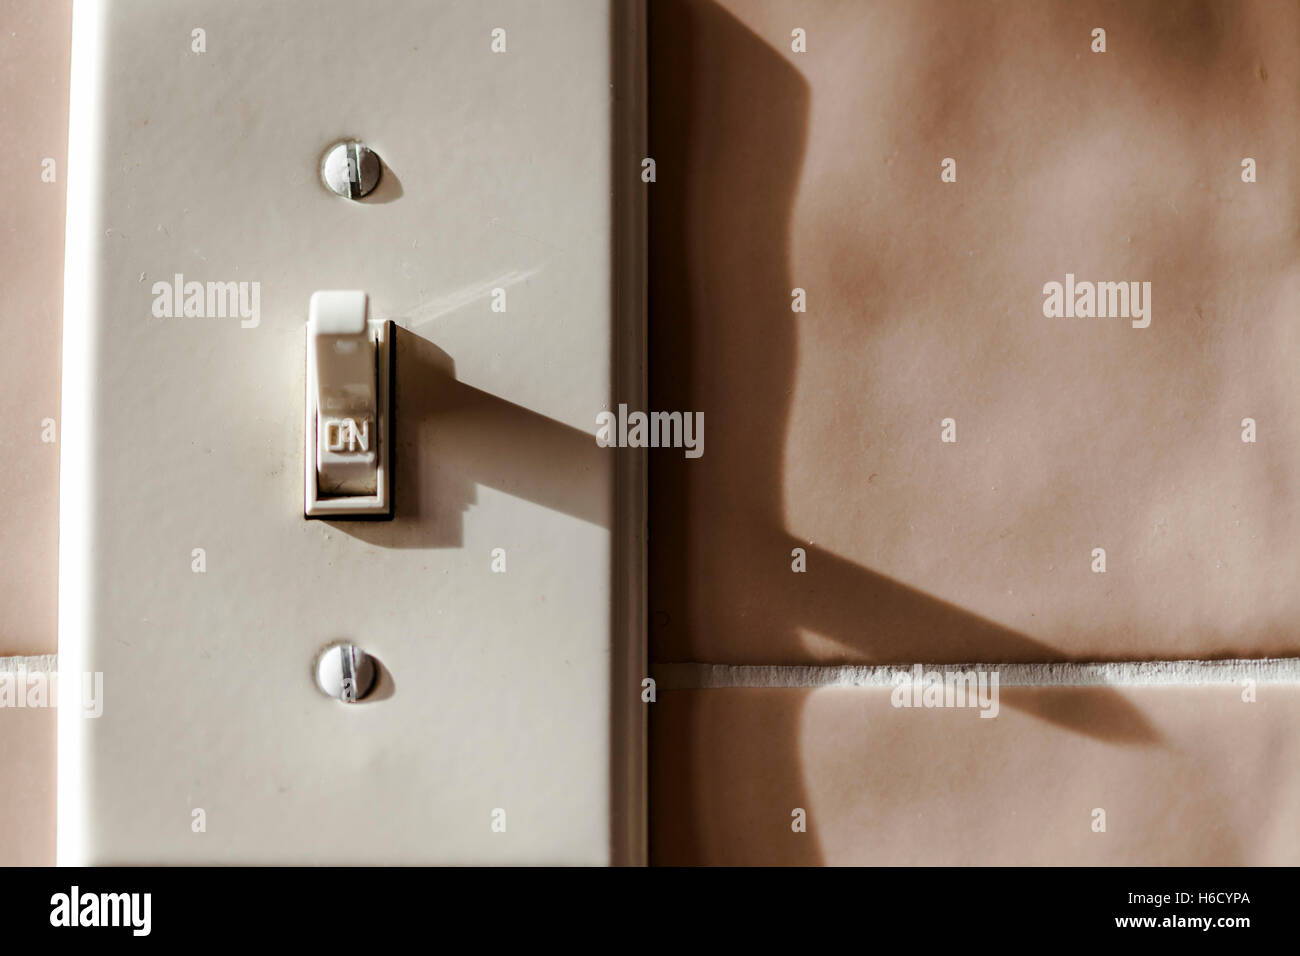 Light switch on tile ceramics wall turned on Stock Photo